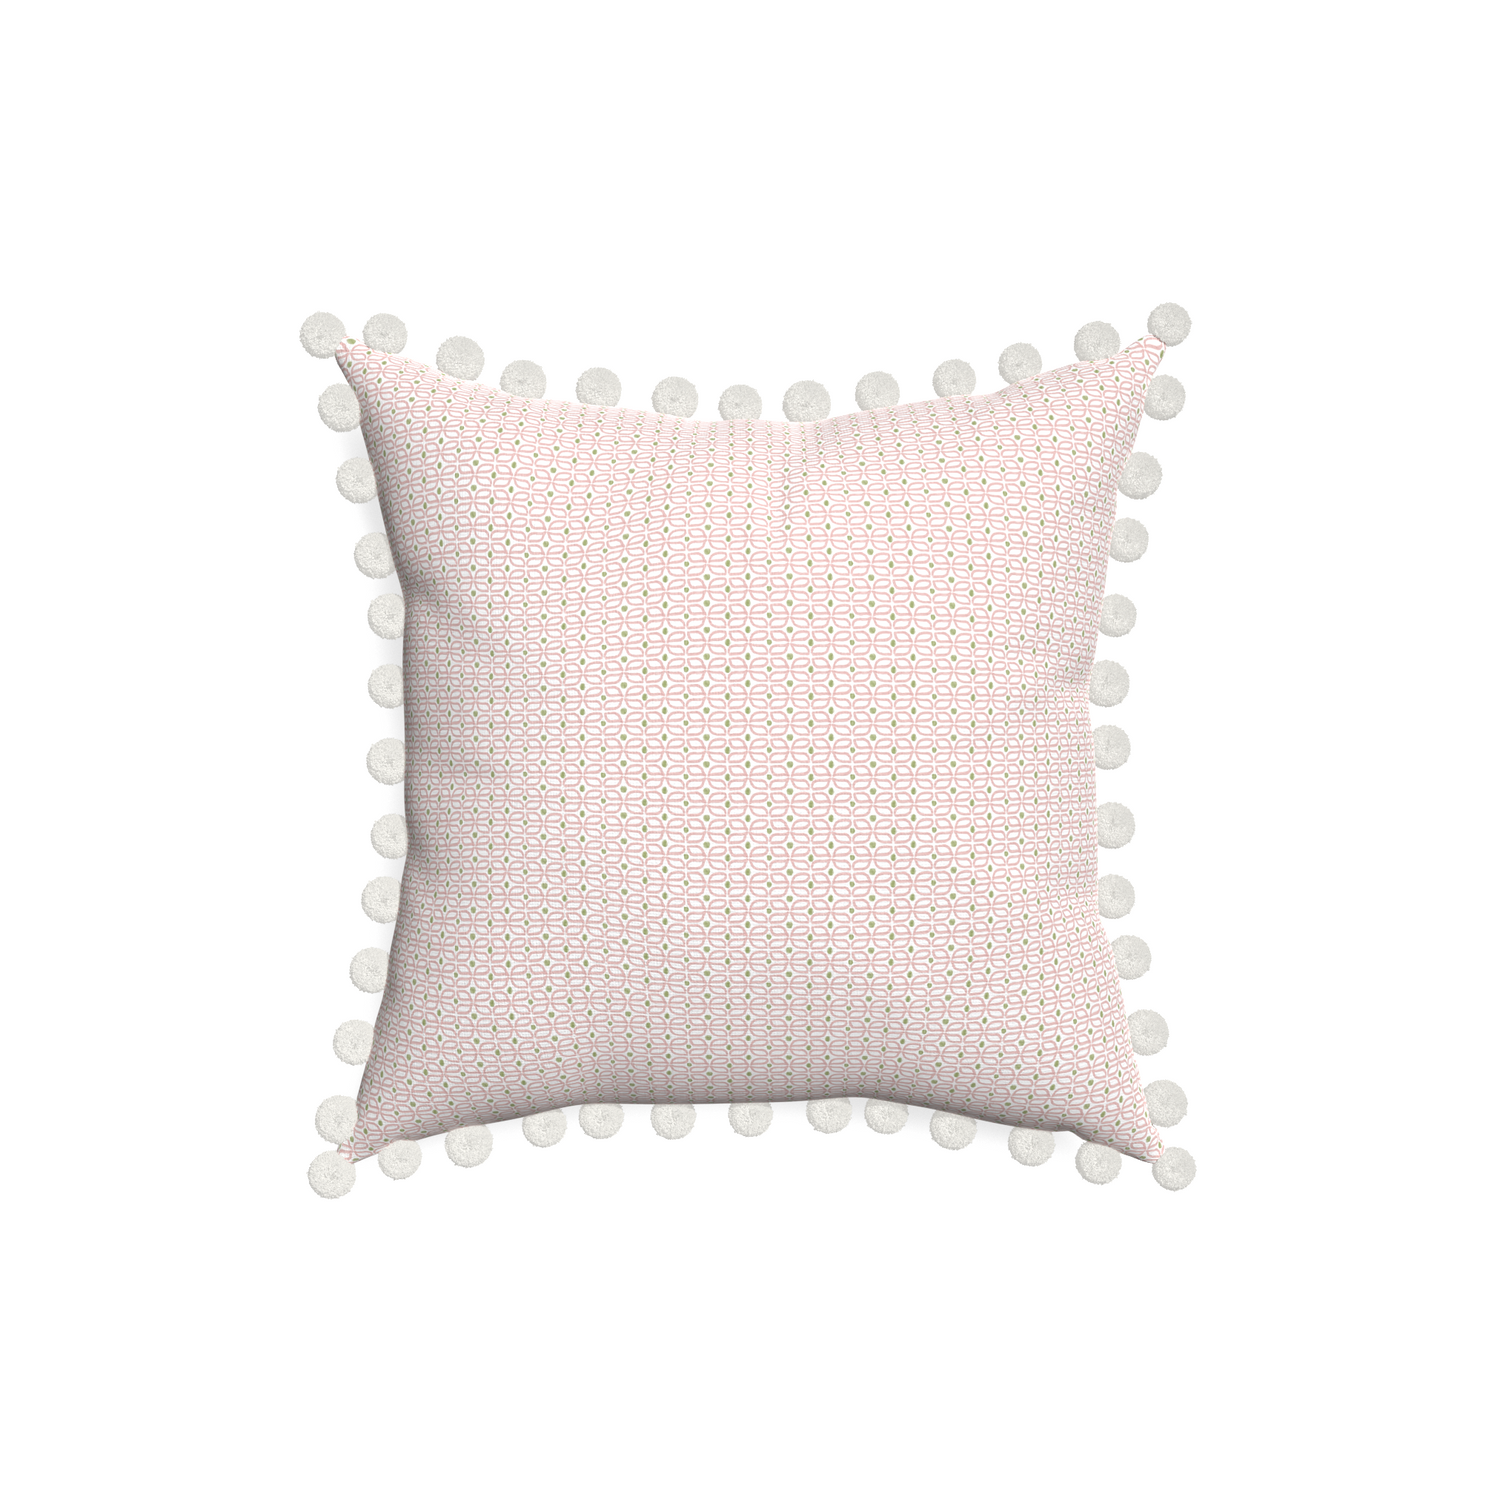 18-square loomi pink custom pillow with snow pom pom on white background